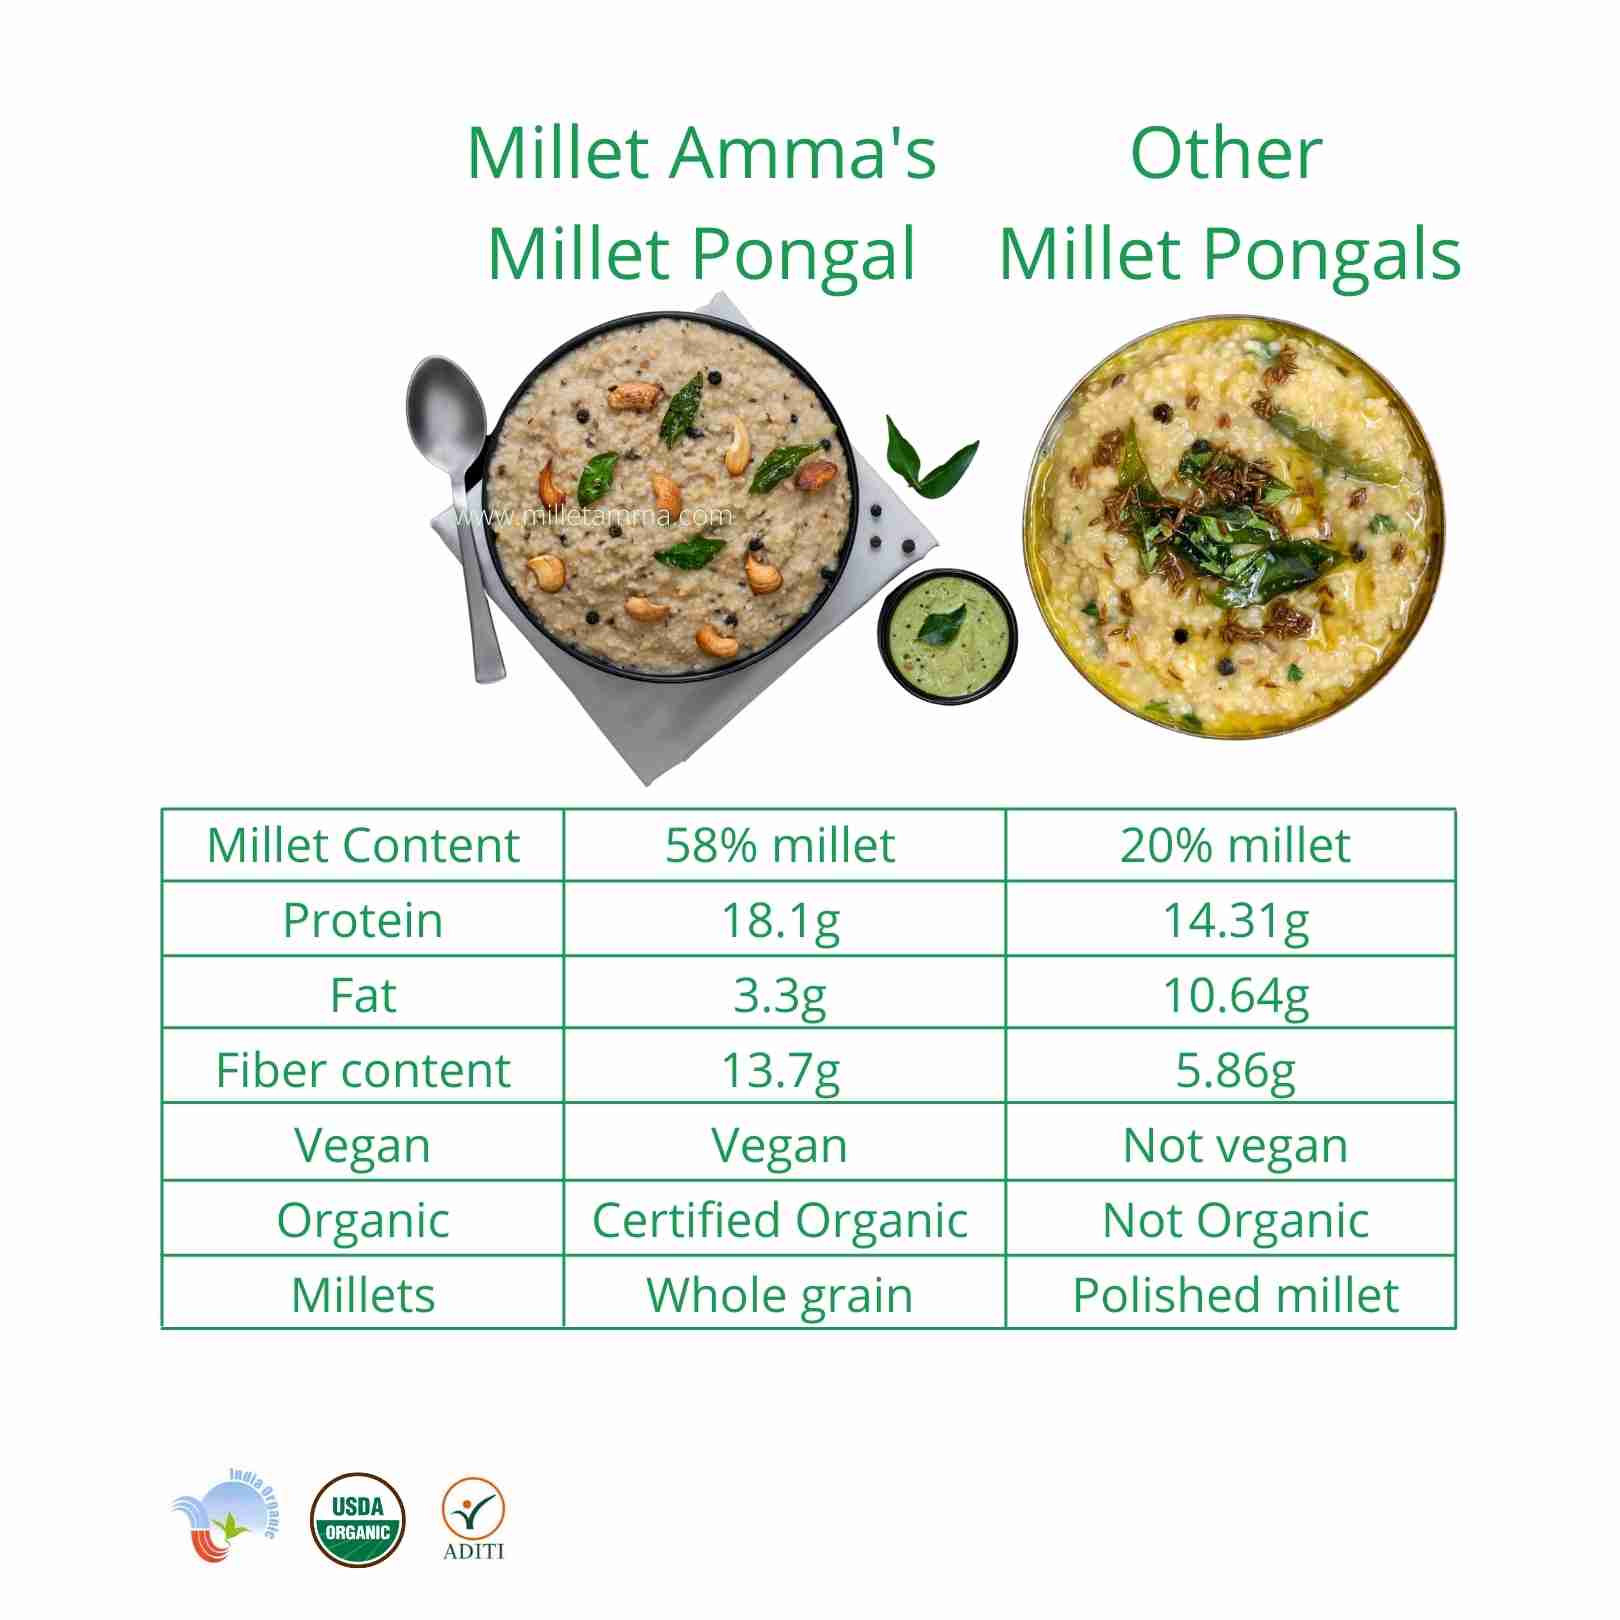 Millet Amma’s Organic Millet Pongal Mix- There’s nothing like piping hot Millet Pongal for breakfast!  Millet Amma’s Organic Millet Pongal has a millet content of over 64%. Made from Foxtail Millet and Moong Dal, it is rich in fiber, iron and proteins. It is easy to make and can be prepared in a matter of minutes. 